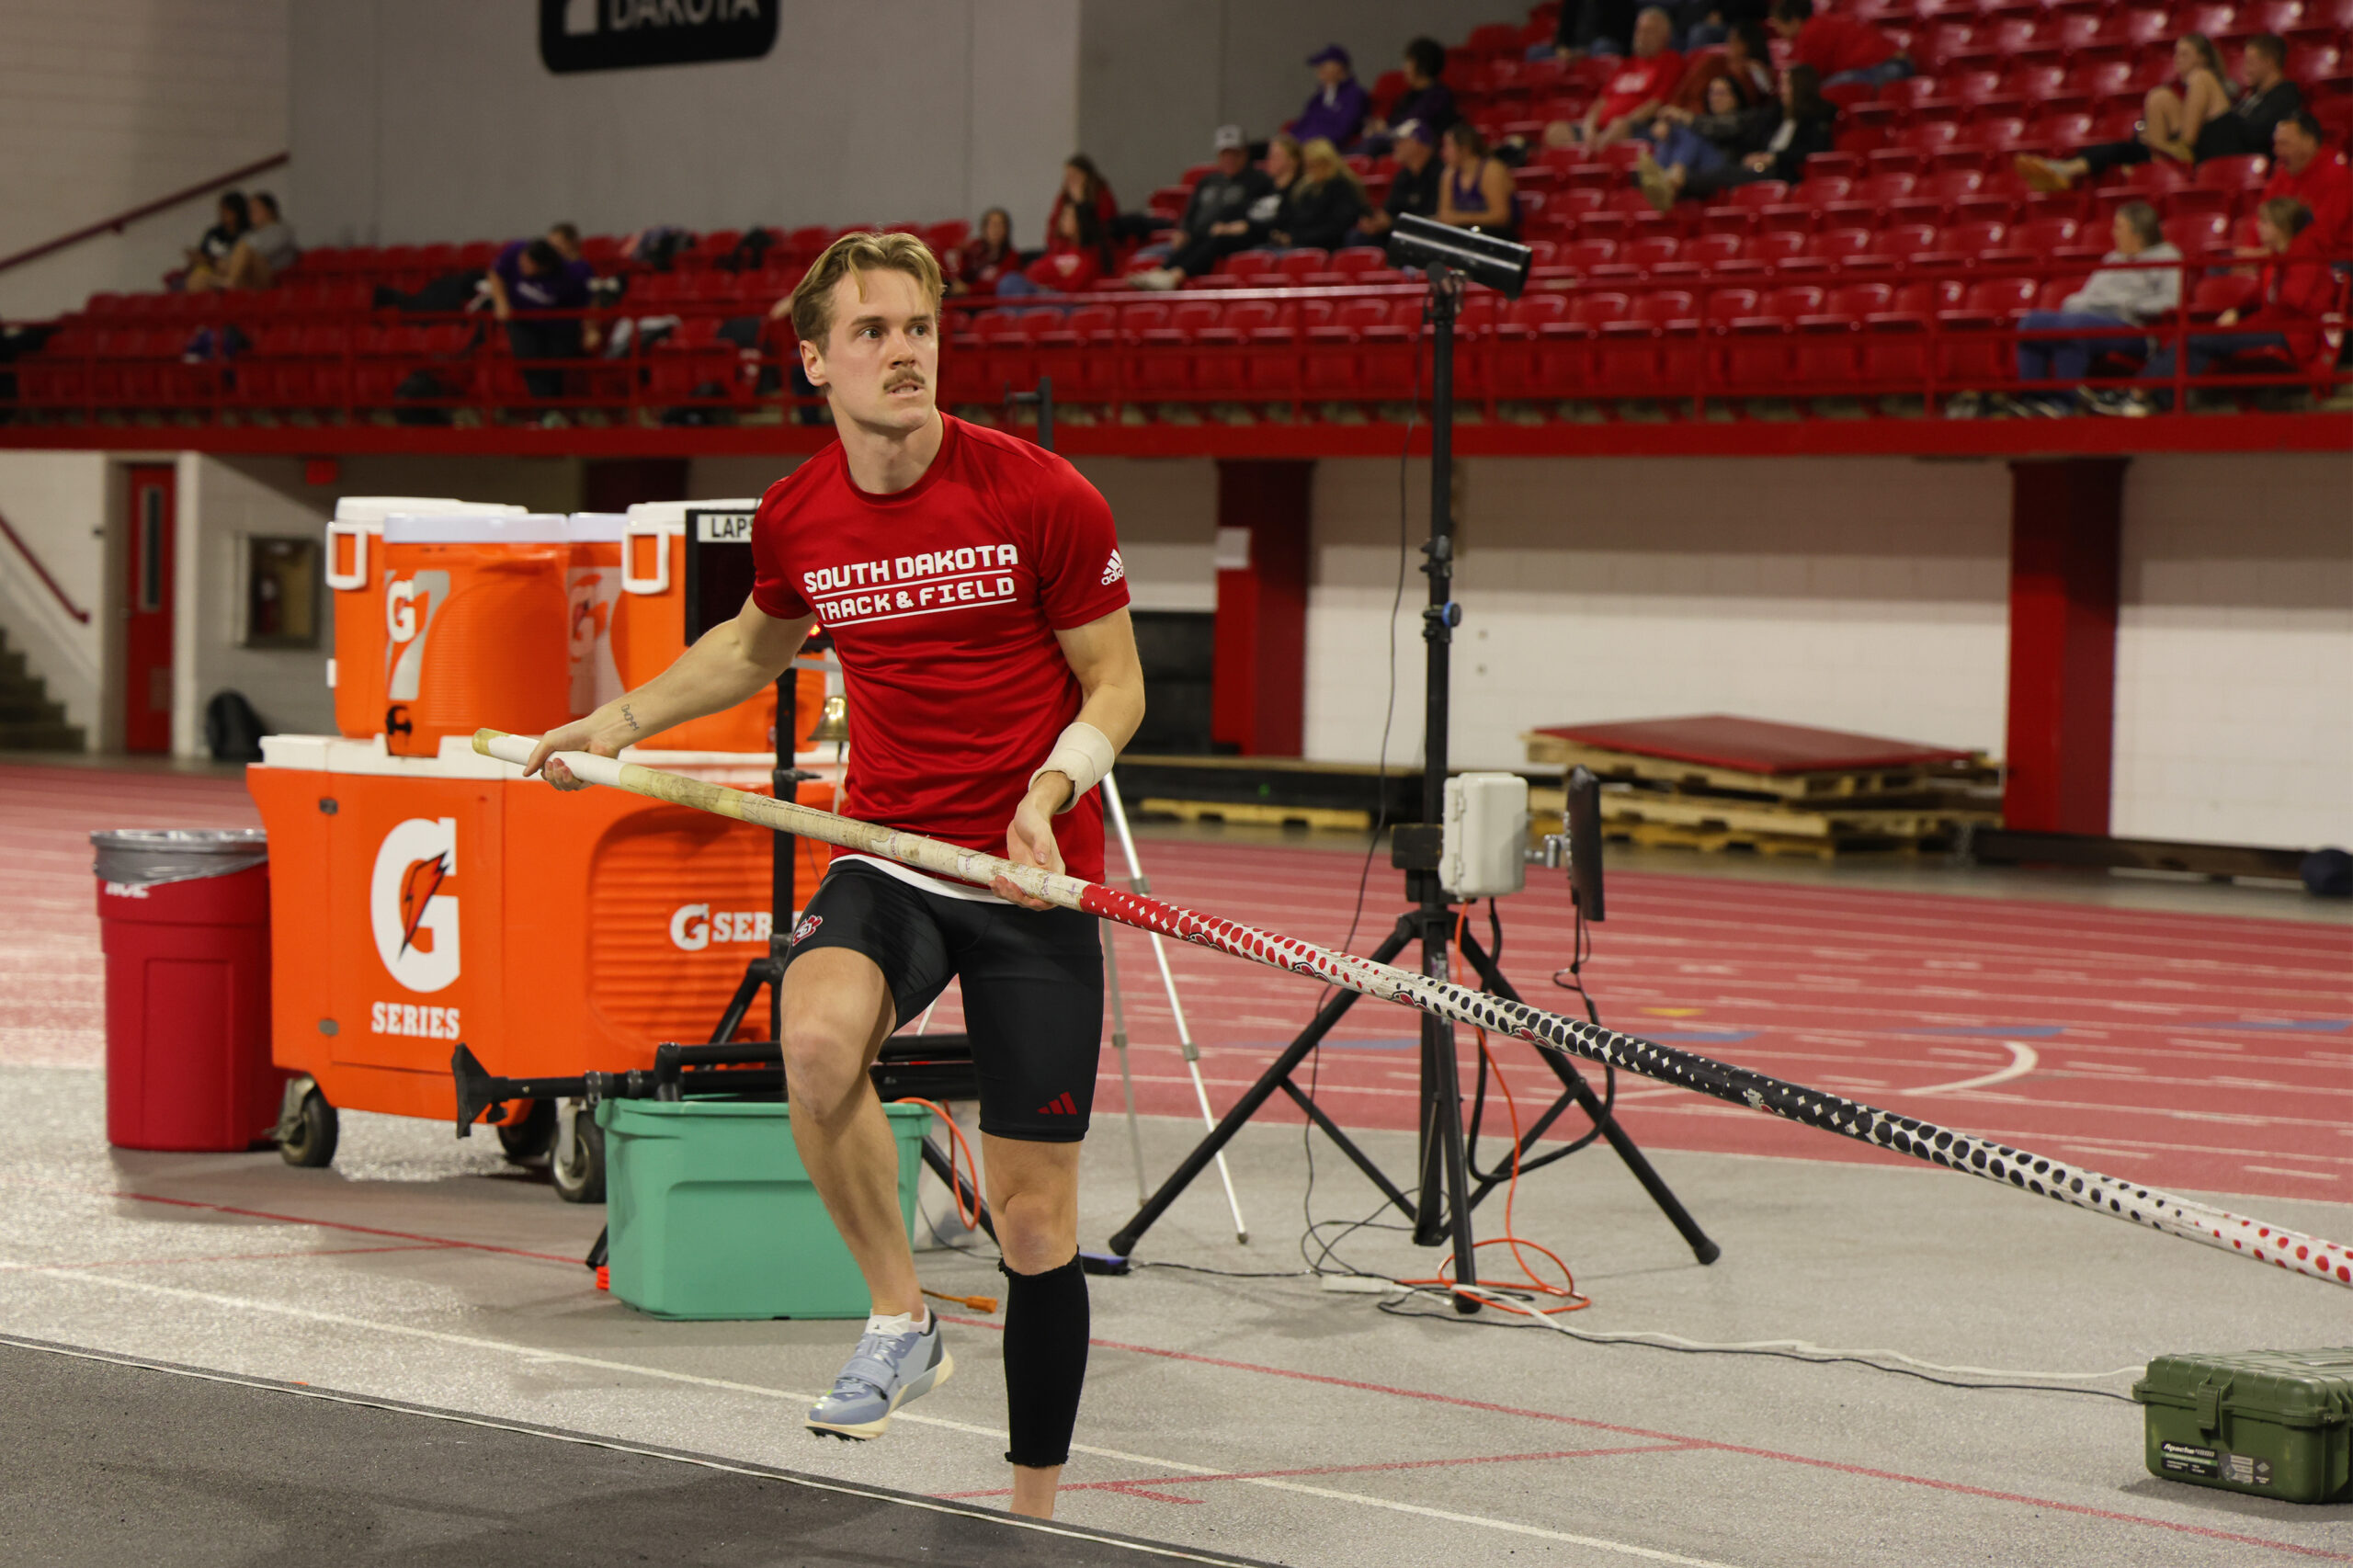 Pole Vaulters Vault into the National Rankings